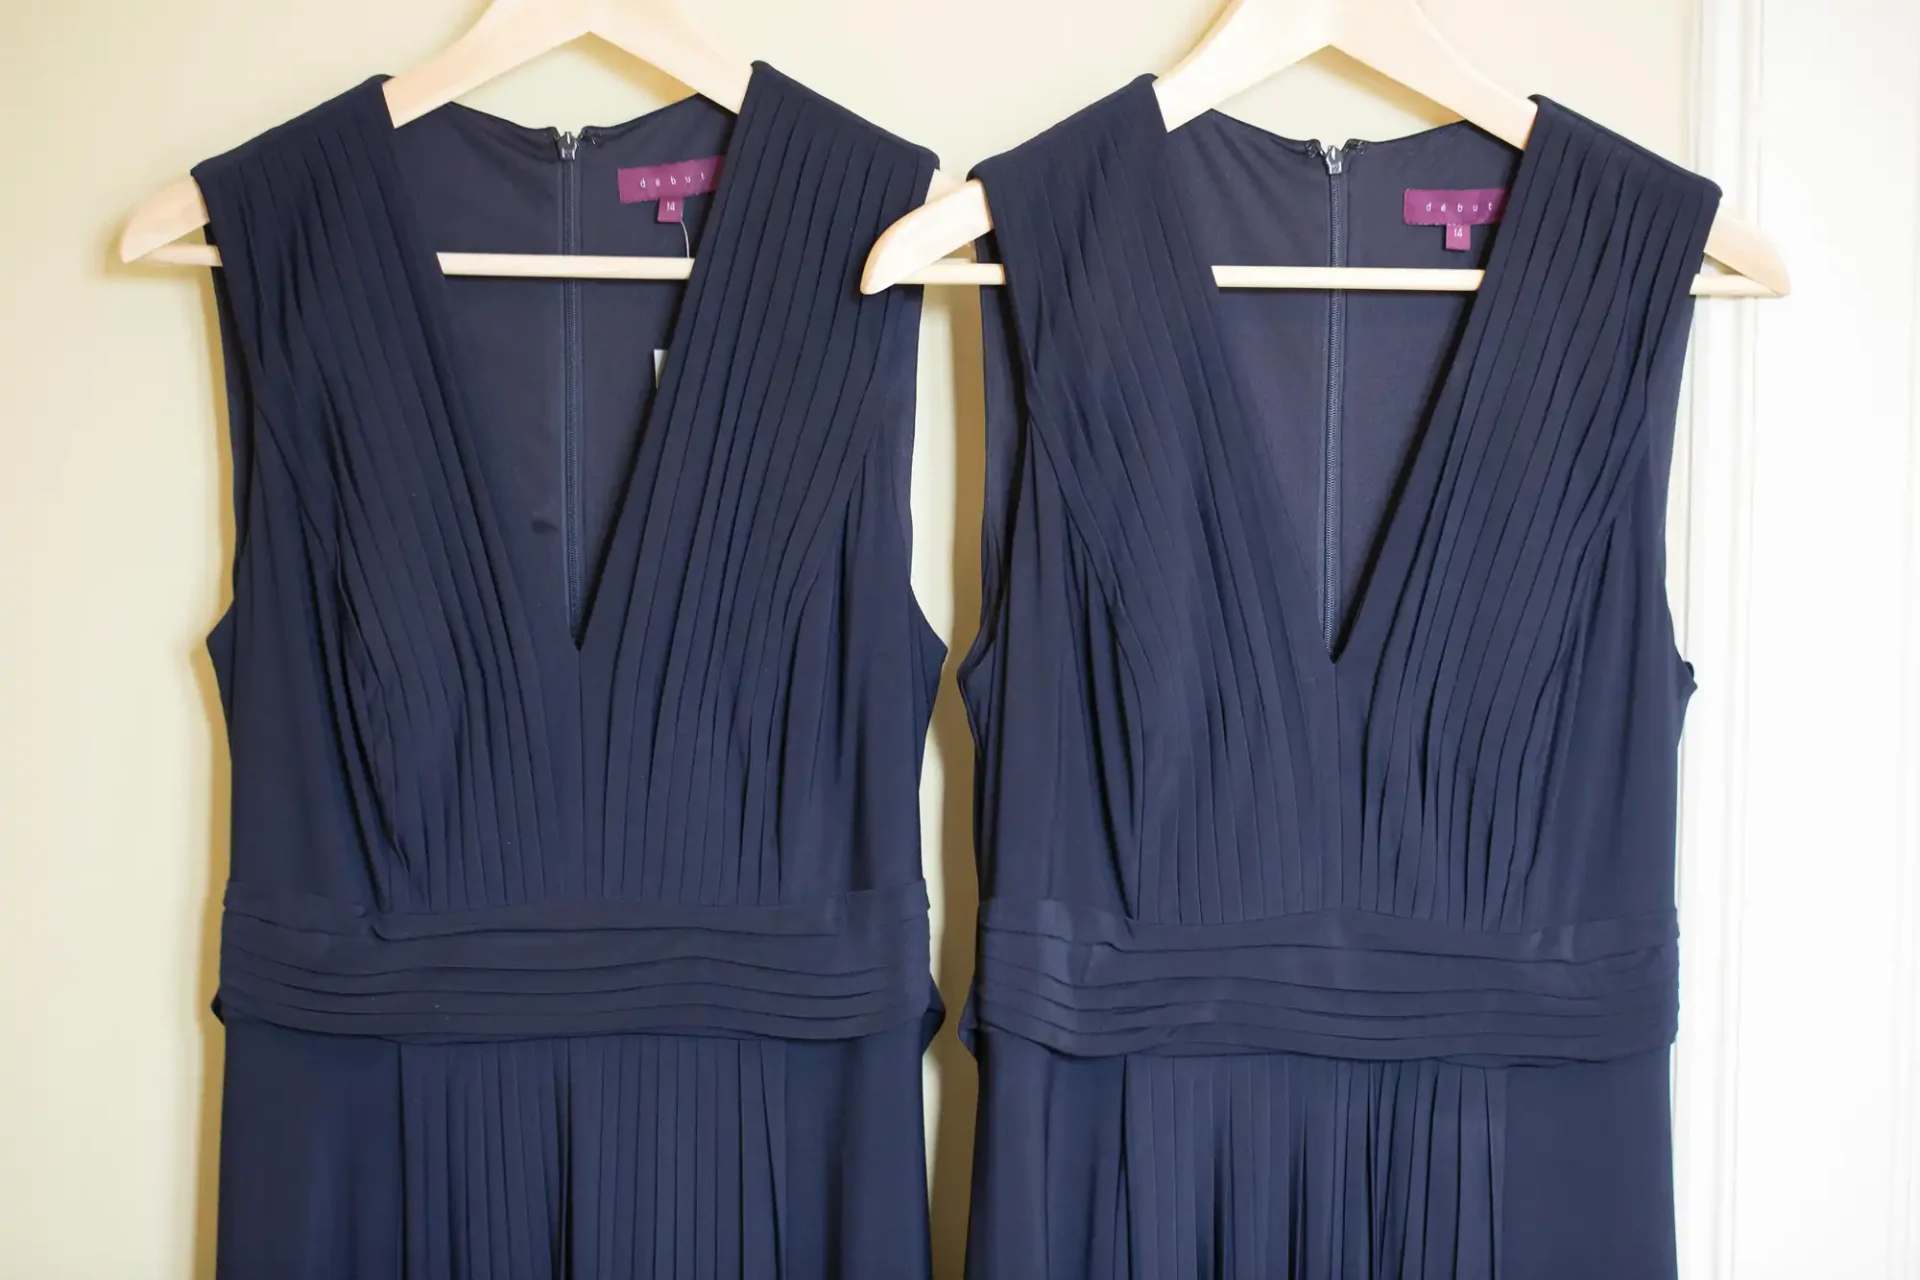 Two navy blue dresses with pleated designs hanging on white hangers against a cream-colored door.